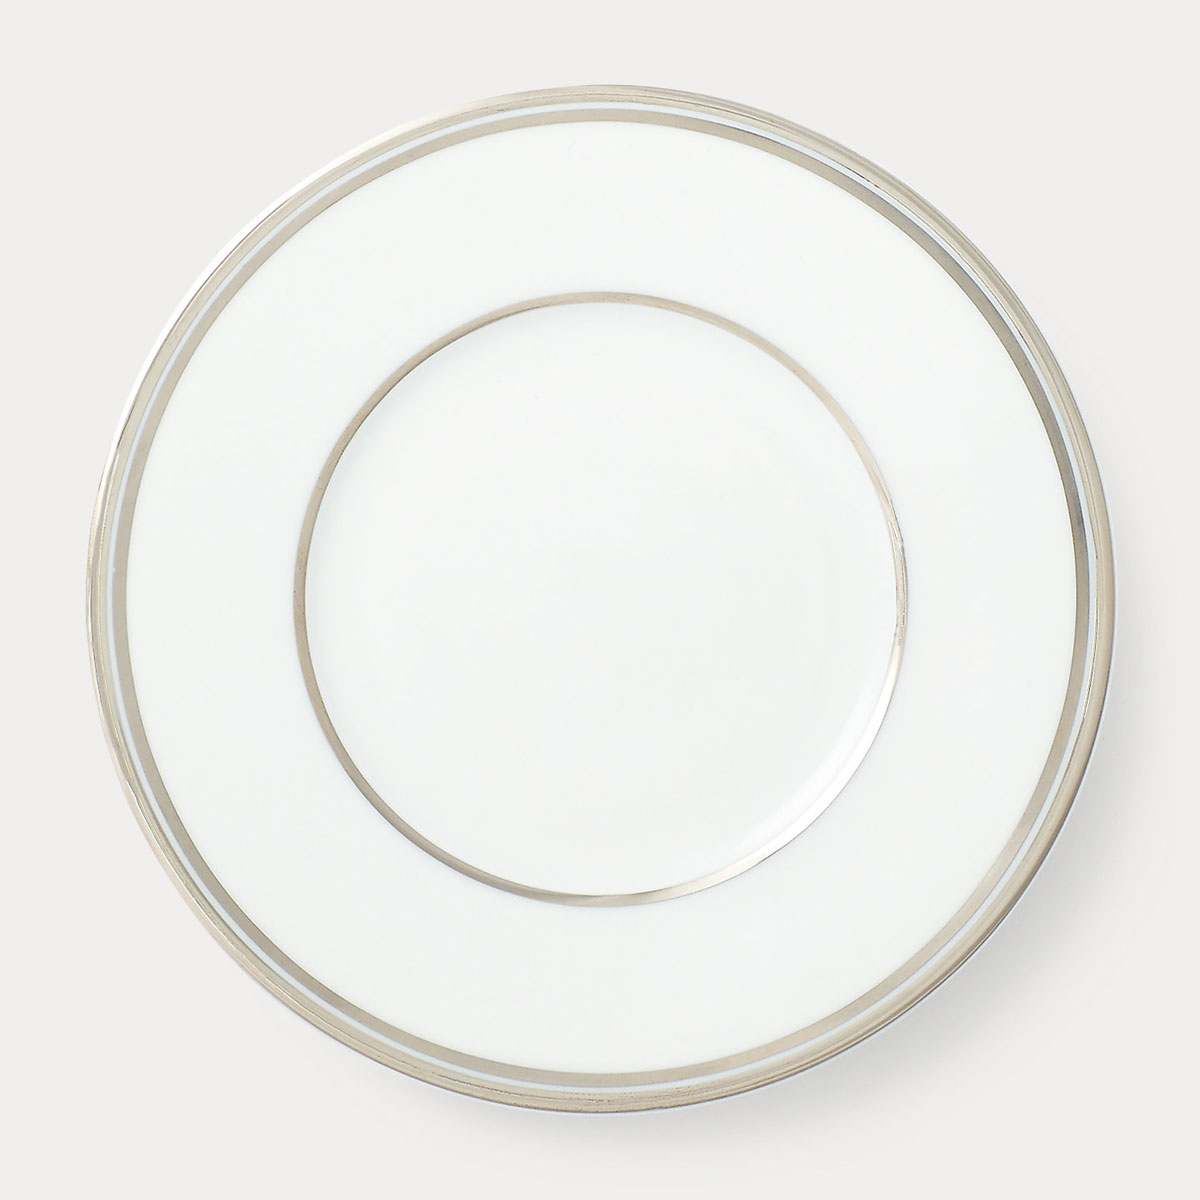 Ralph Lauren Wilshire Bread And Butter Plate, Silver And White